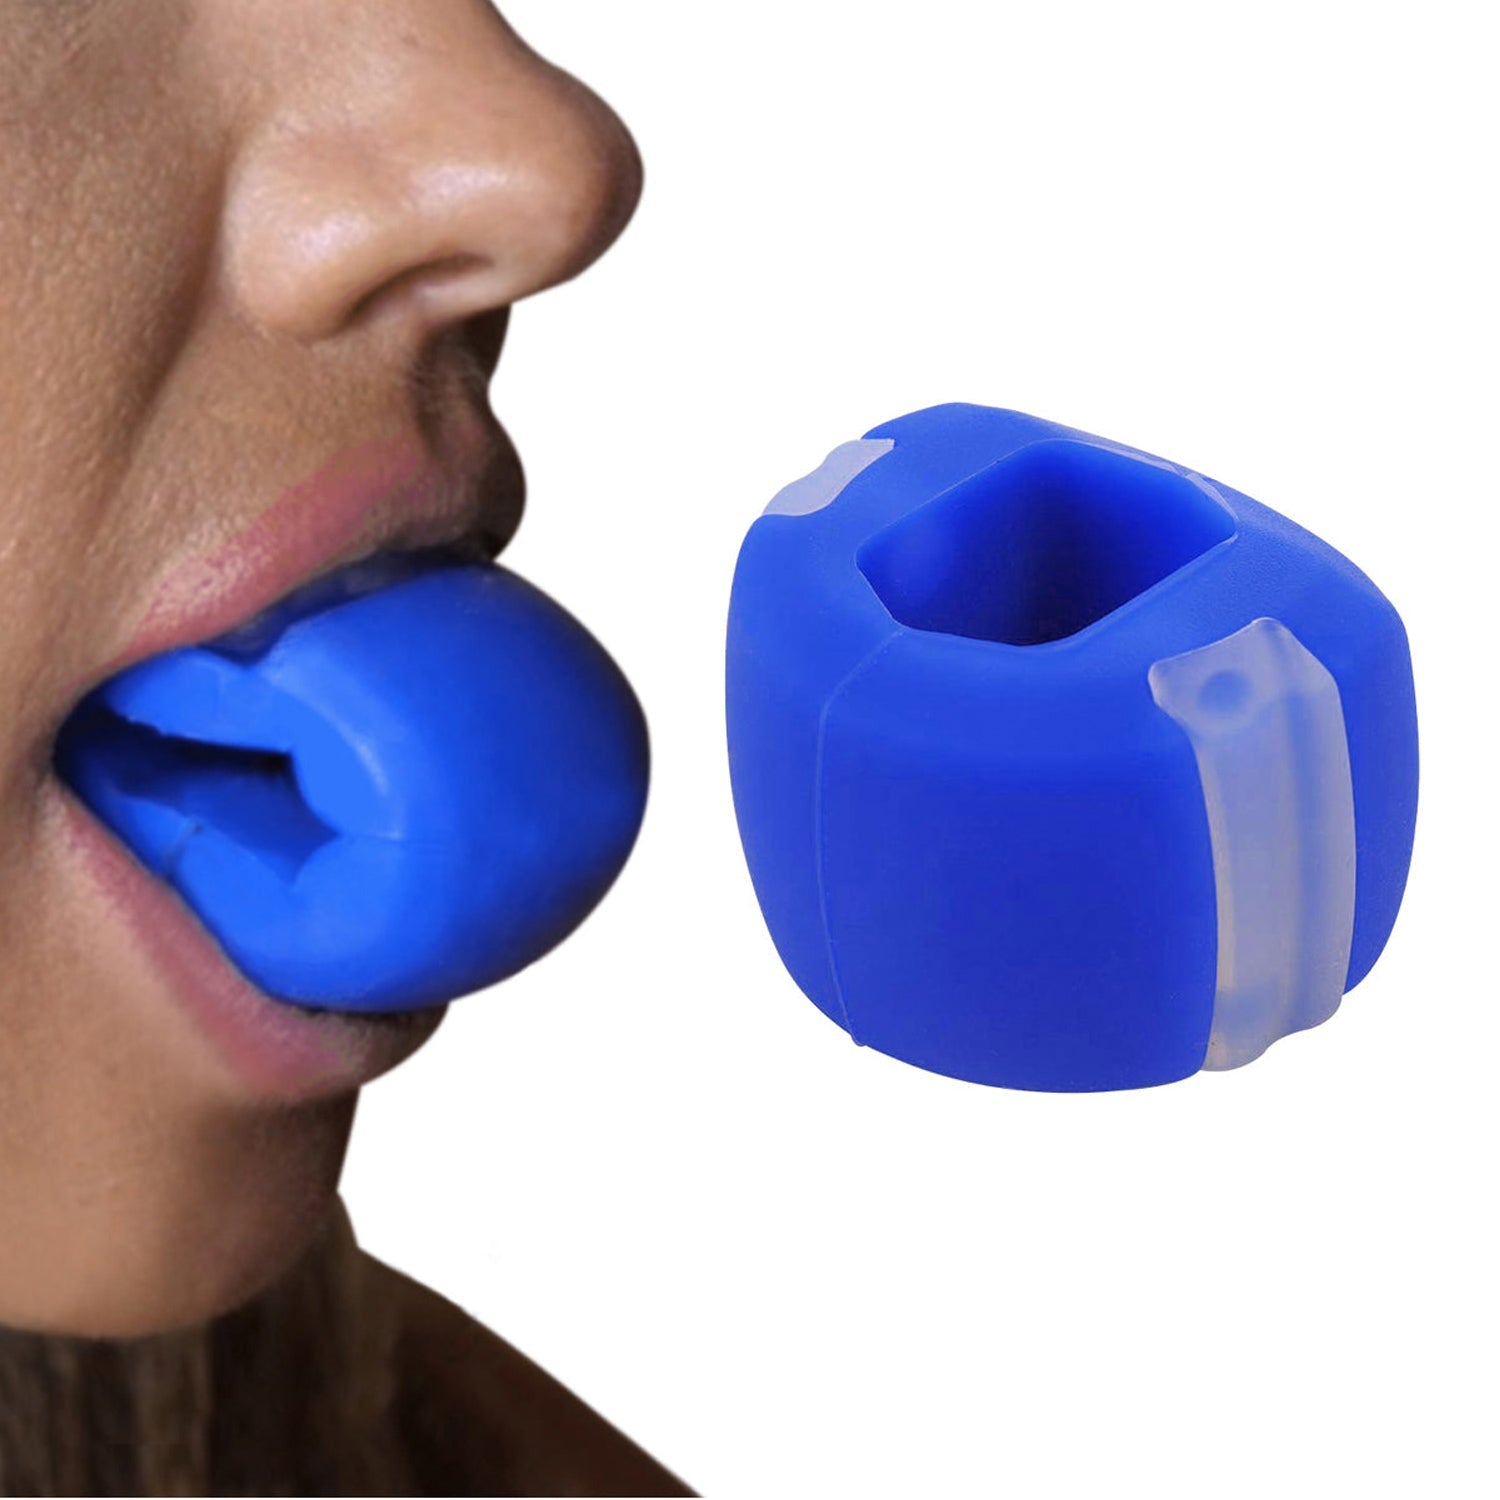 6101V Jawline Exerciser Jaw, Face, and Neck Exerciser, Slim and Tone Your Face, Jaw Exerciser For Men & Women, Neck Toning, Facial Exerciser (Blue color) jawline workout freeshipping - DeoDap